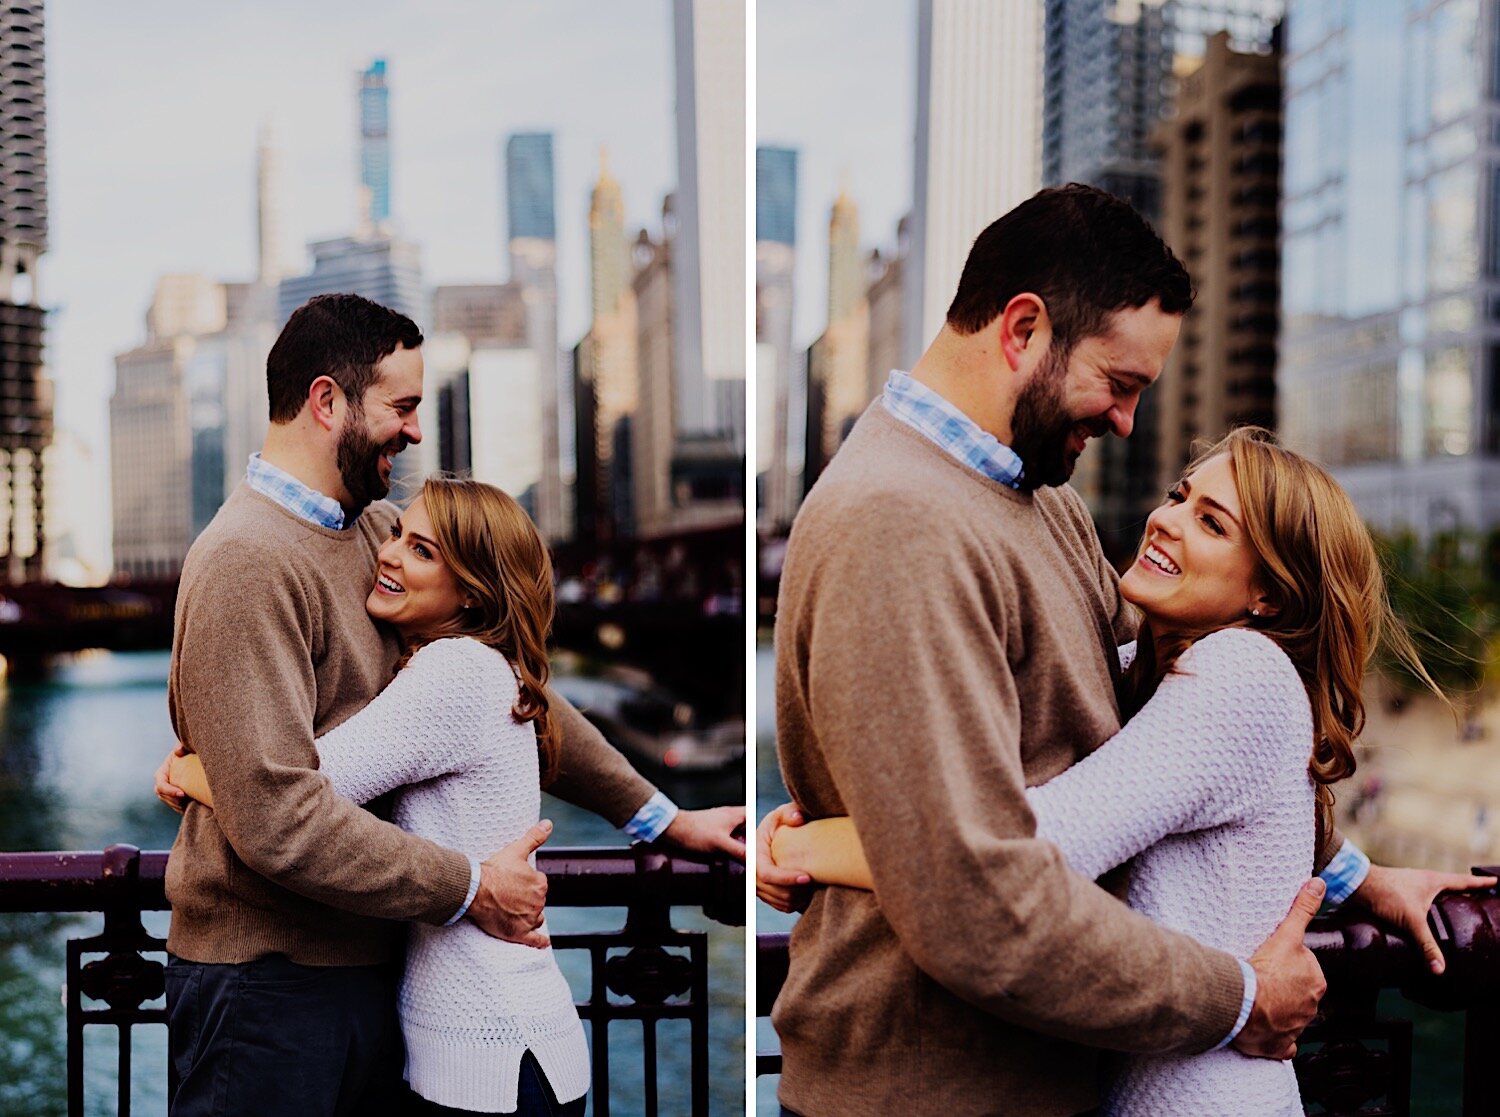 07_Julia-Andy-Chicago-EngagementSession-28_Julia-Andy-Chicago-EngagementSession-29.jpg